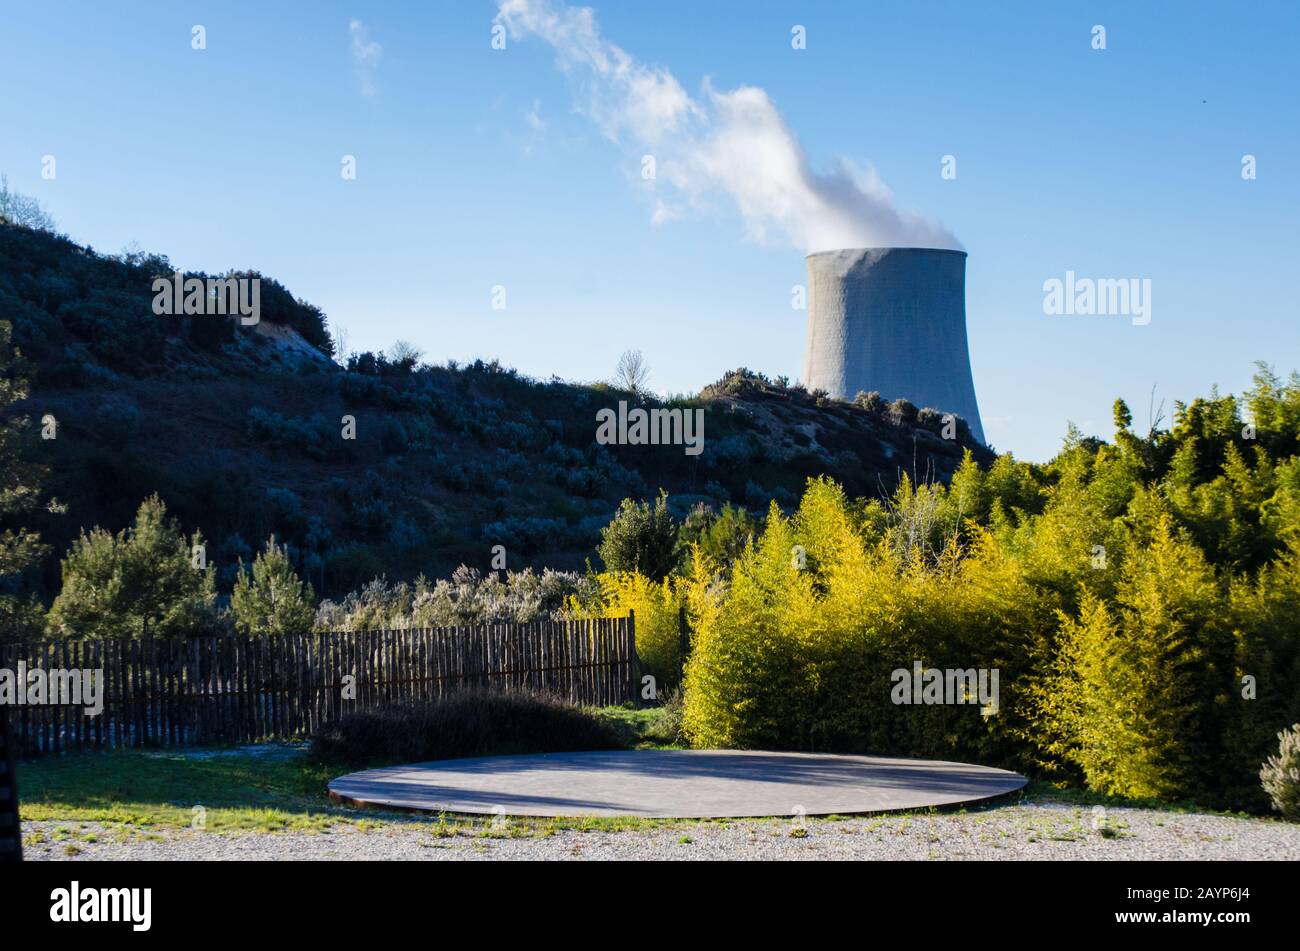 A geothermal power station chimney in Sasso Pisano, Tuscany Italy Stock Photo